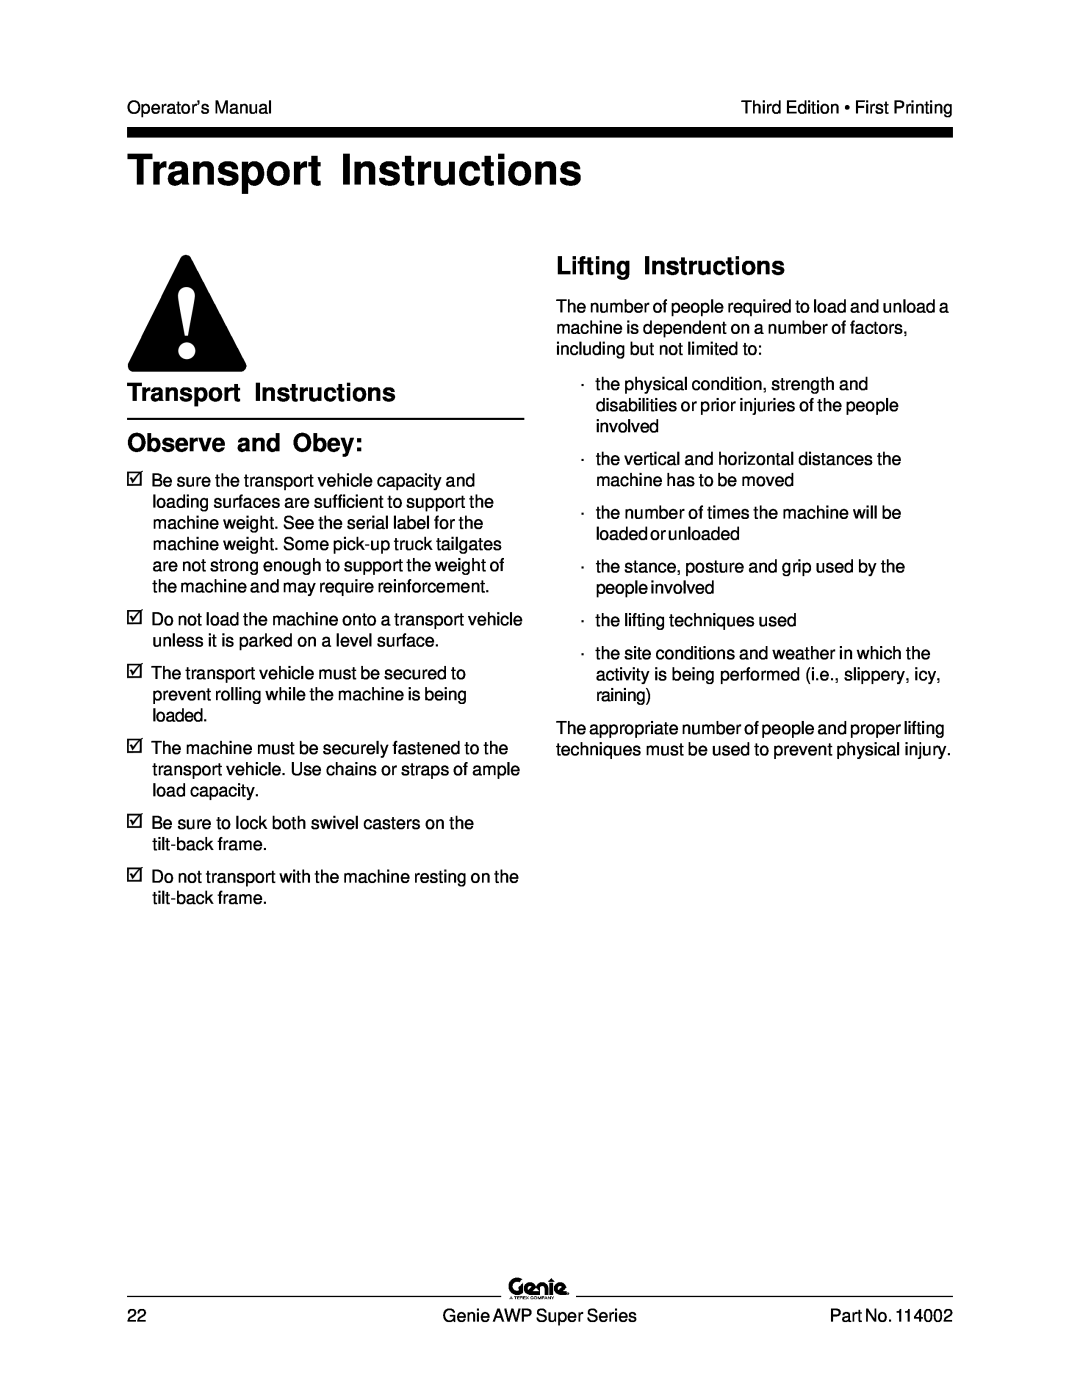 Genie 114002 manual Transport Instructions Observe and Obey, Lifting Instructions 